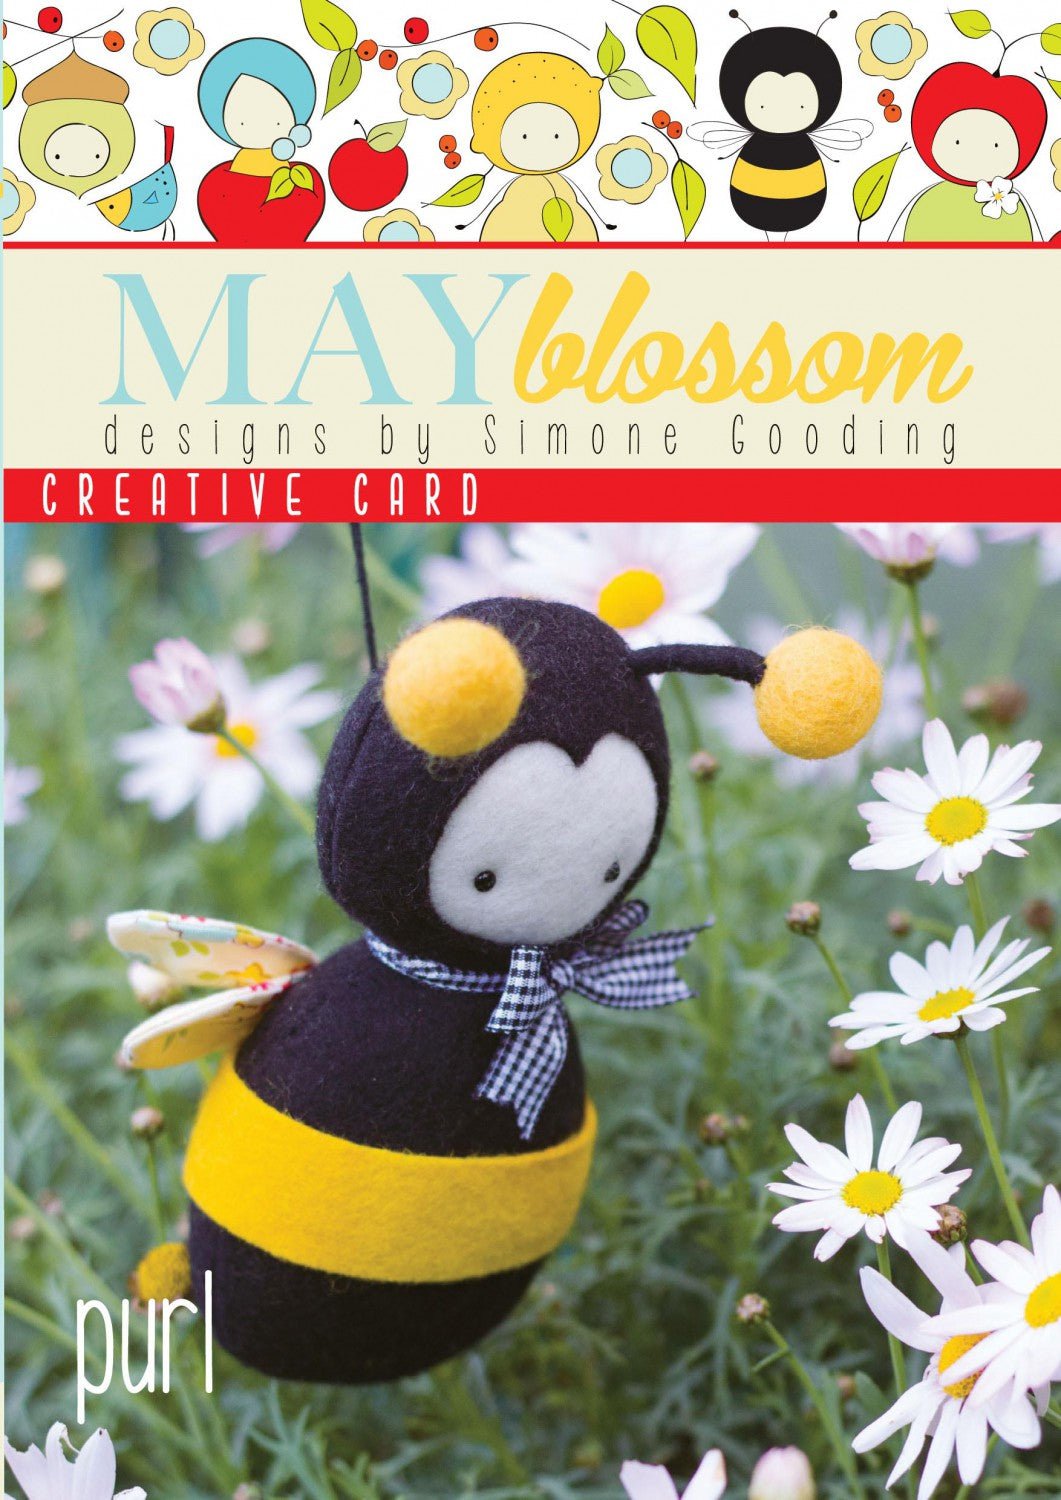 May Blossom - Little Bumble Bee - Creative Card Pattern -Simone Gooding